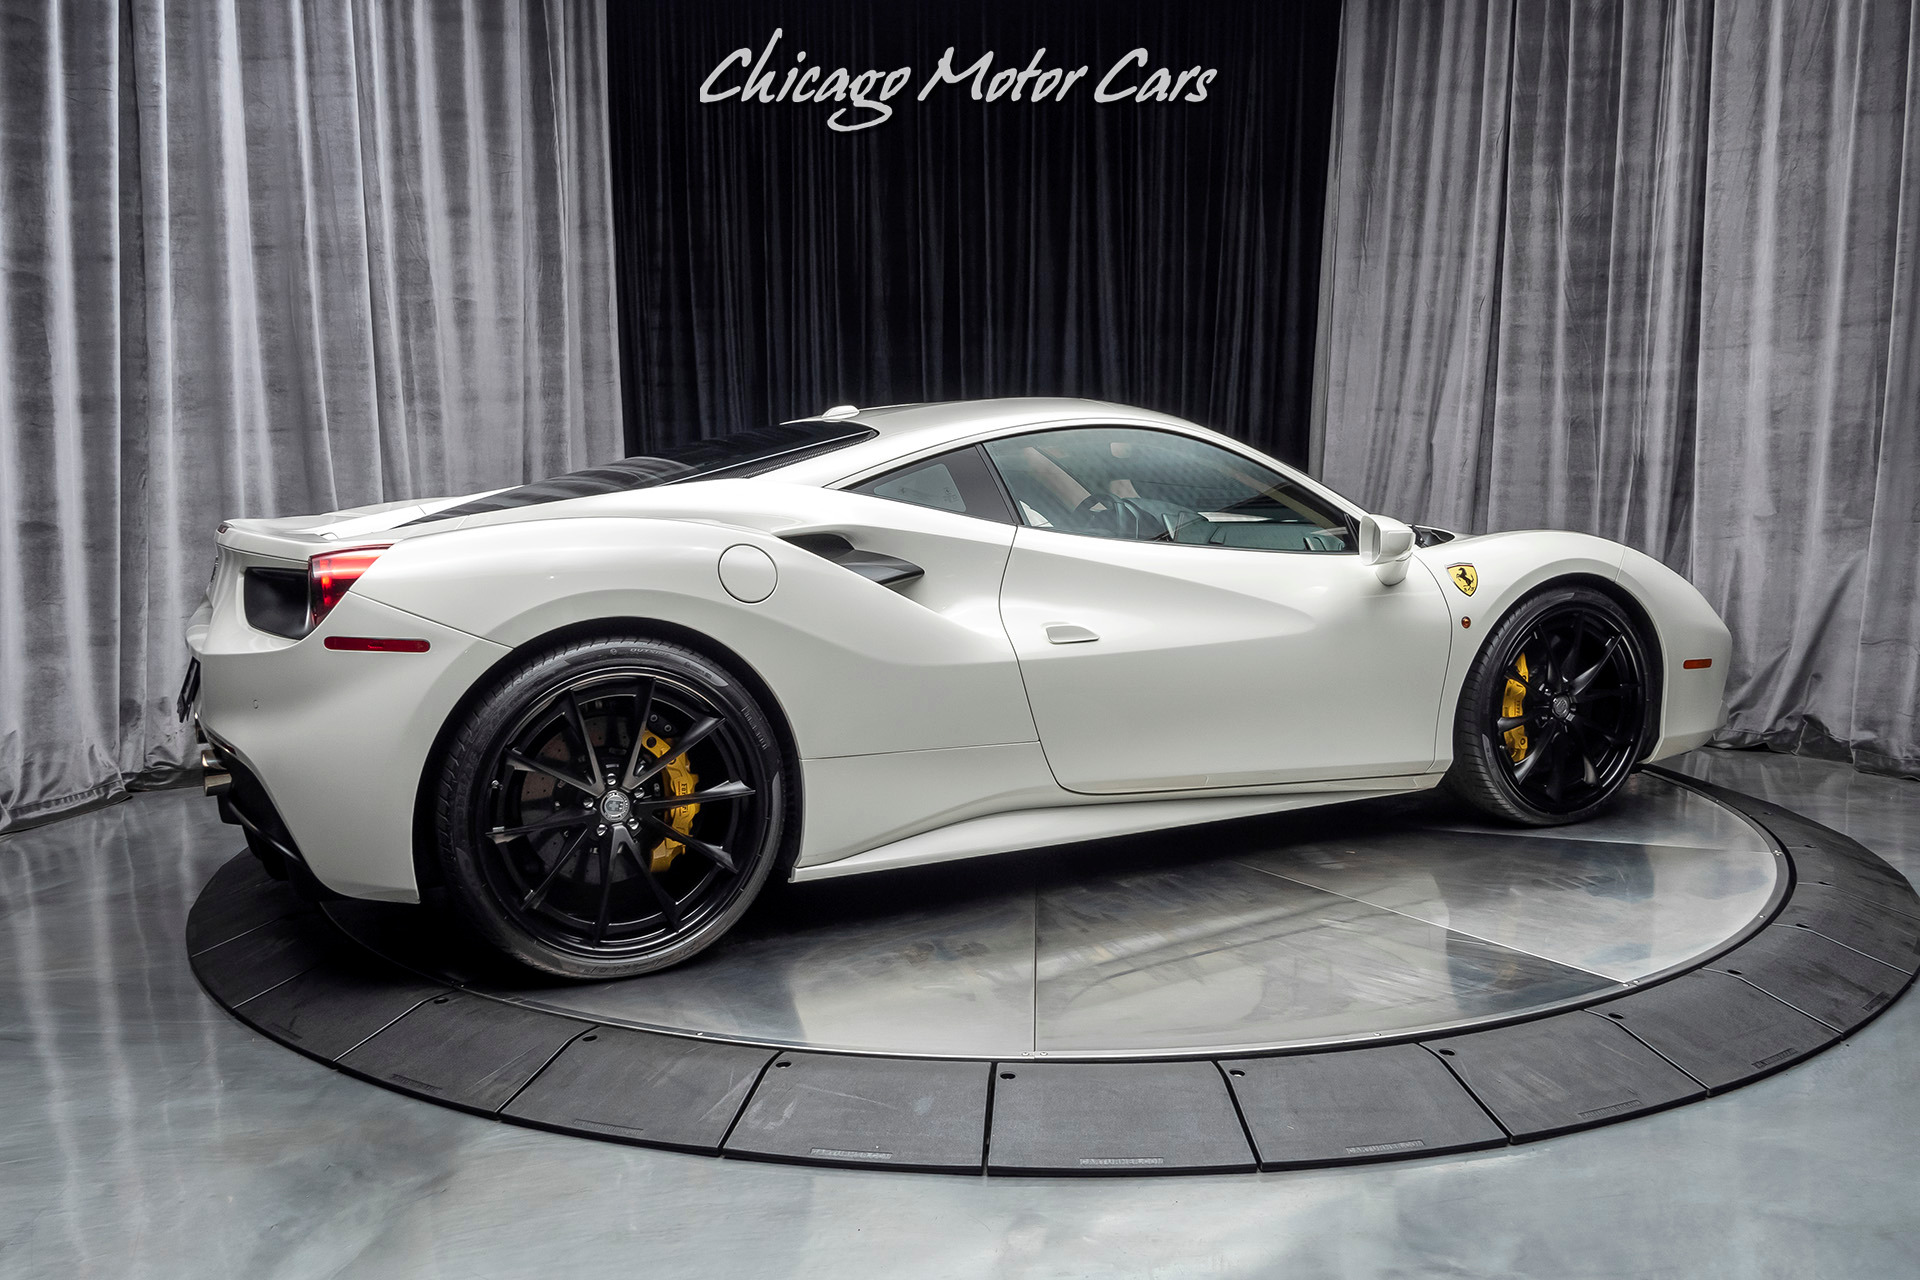 Used 2018 Ferrari 488 Gtb Coupe Msrp 320k Hre Upgraded Wheels Loaded Stunning For Sale Special Pricing Chicago Motor Cars Stock 17032a